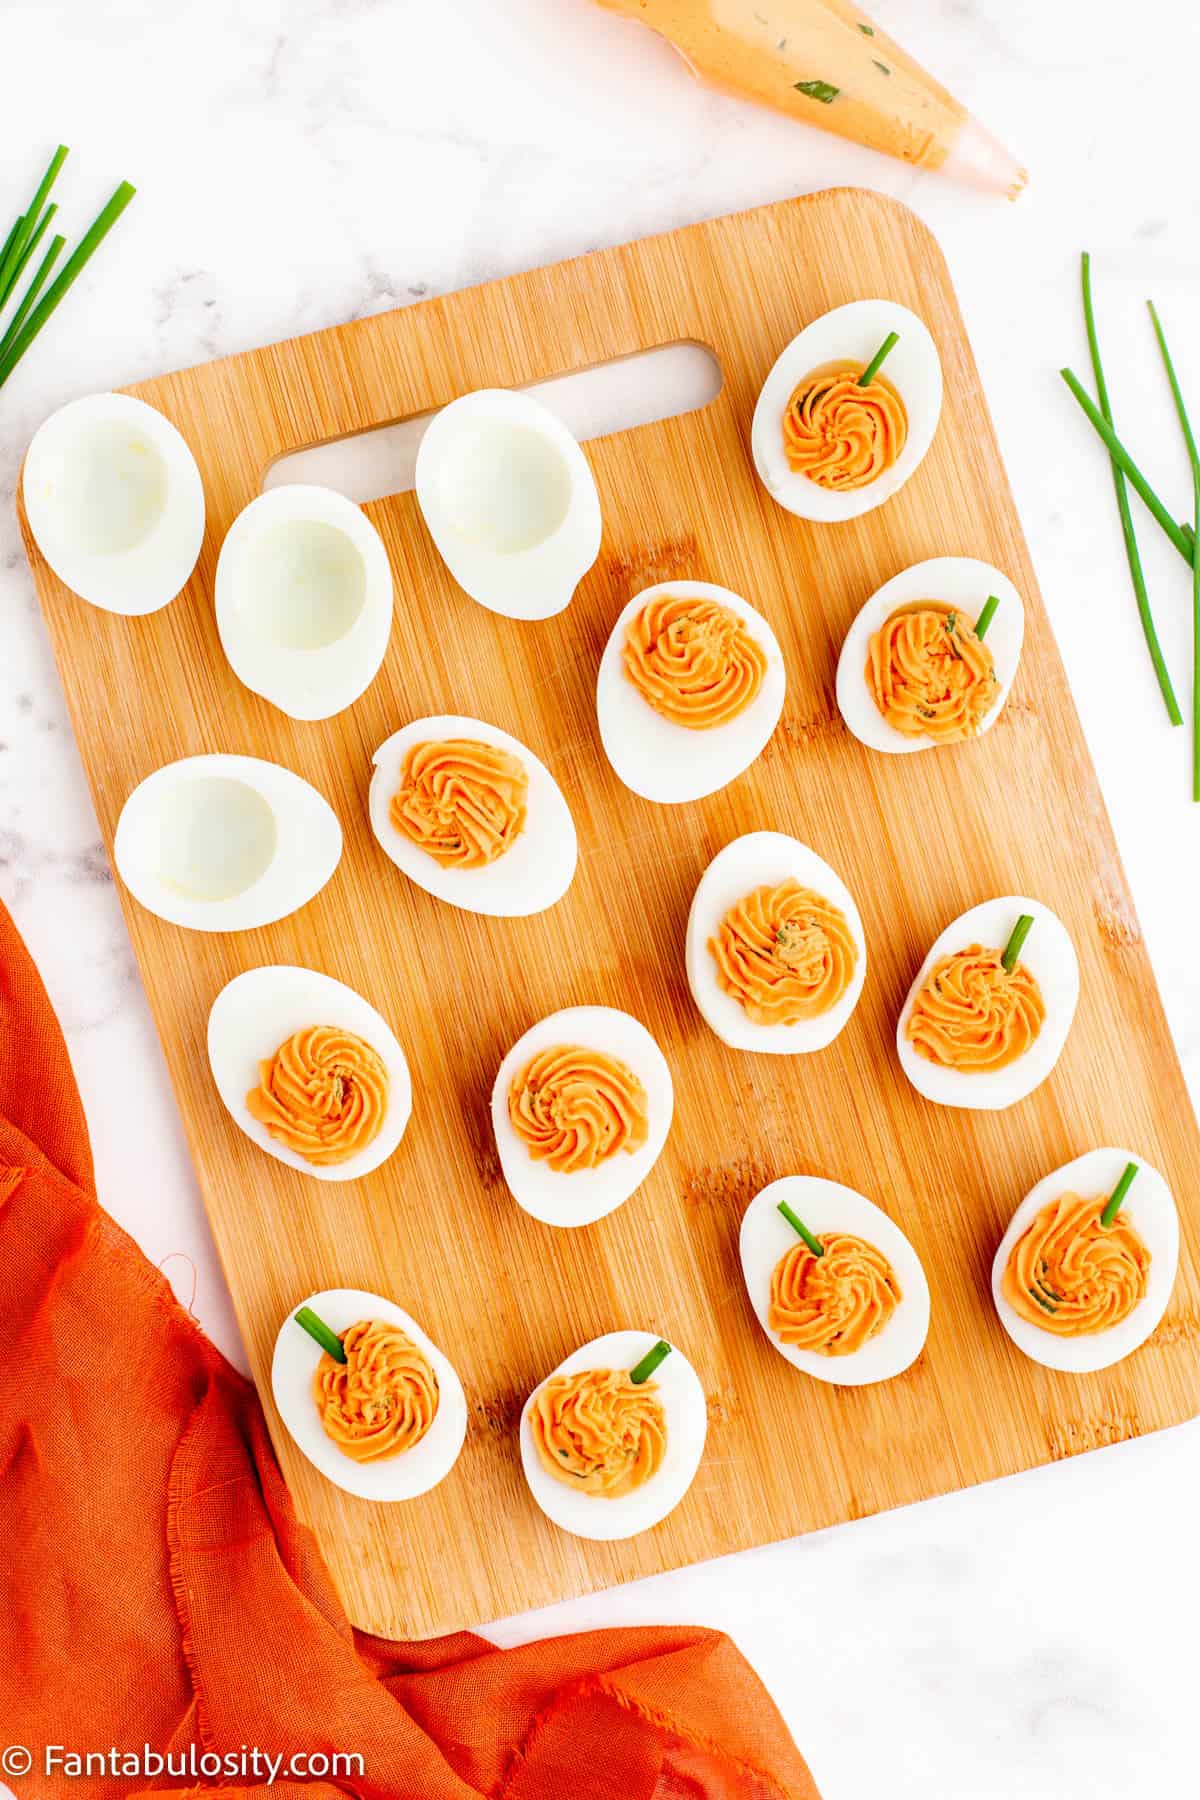 A wooden cutting board displays halved hard boiled eggs, some with piped yolk filling, are in various stages of assembly of Pumpkin Deviled Eggs